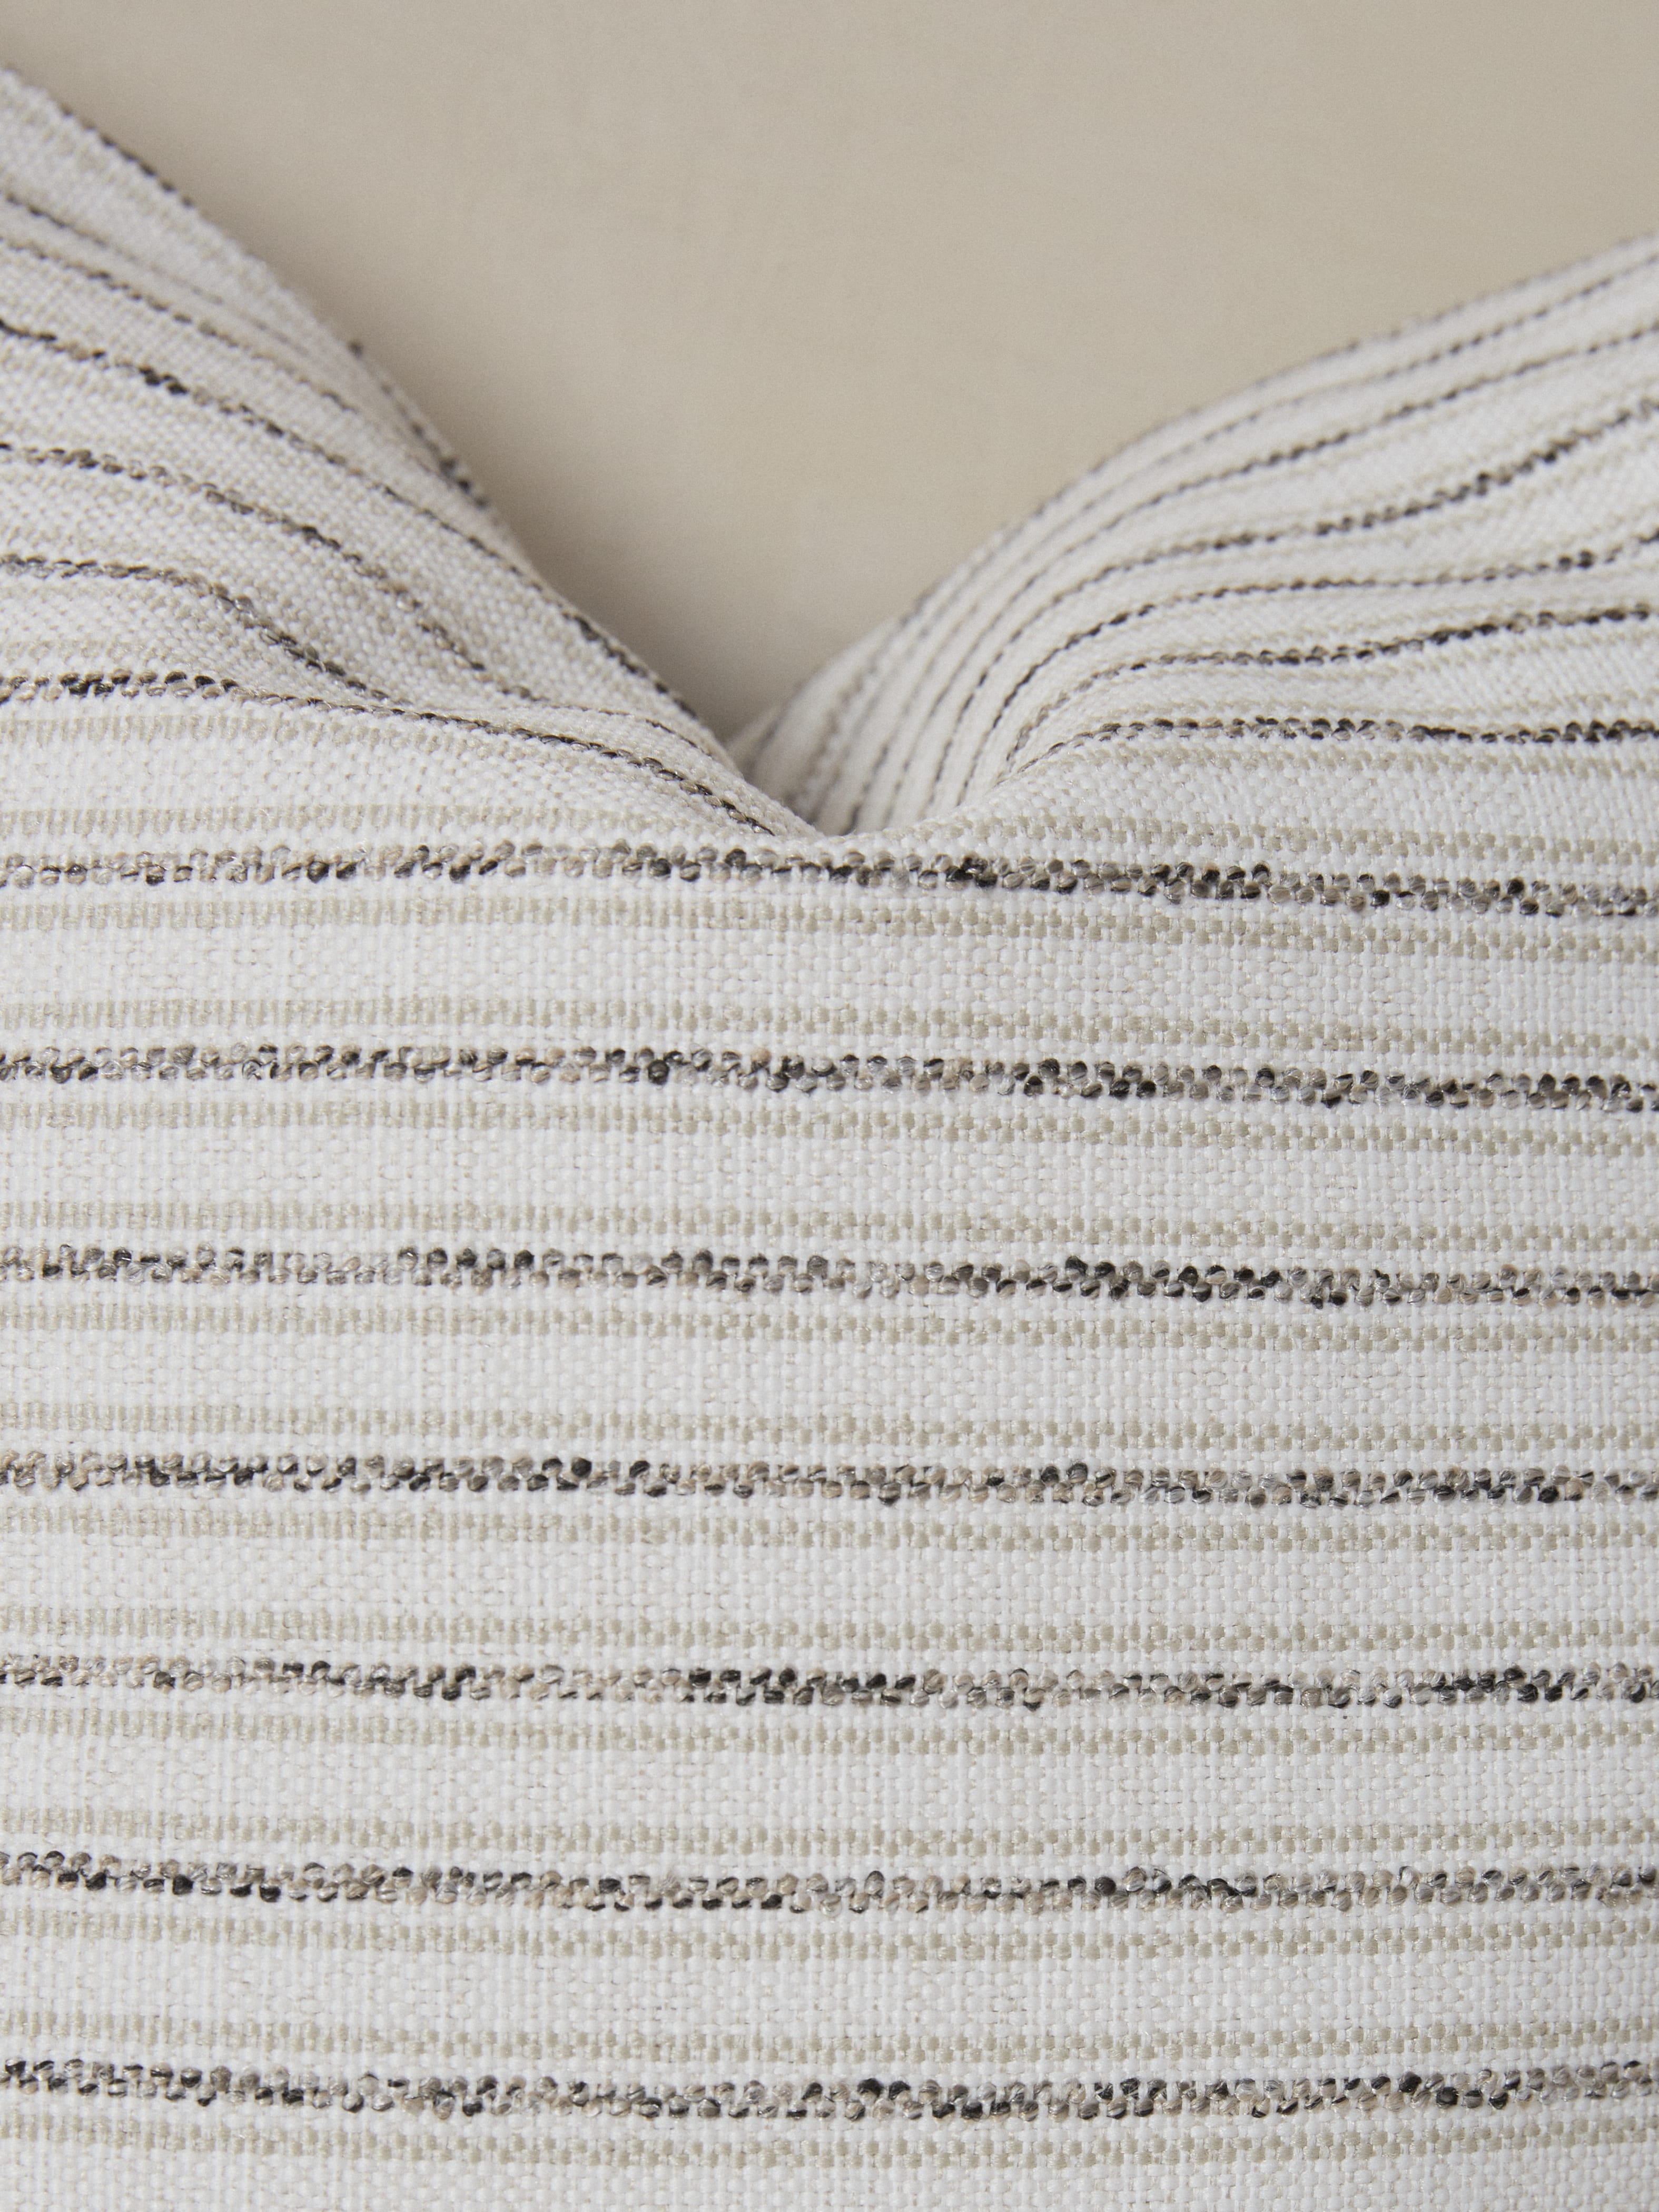 Textural details on the striped Cambridge Pillow.